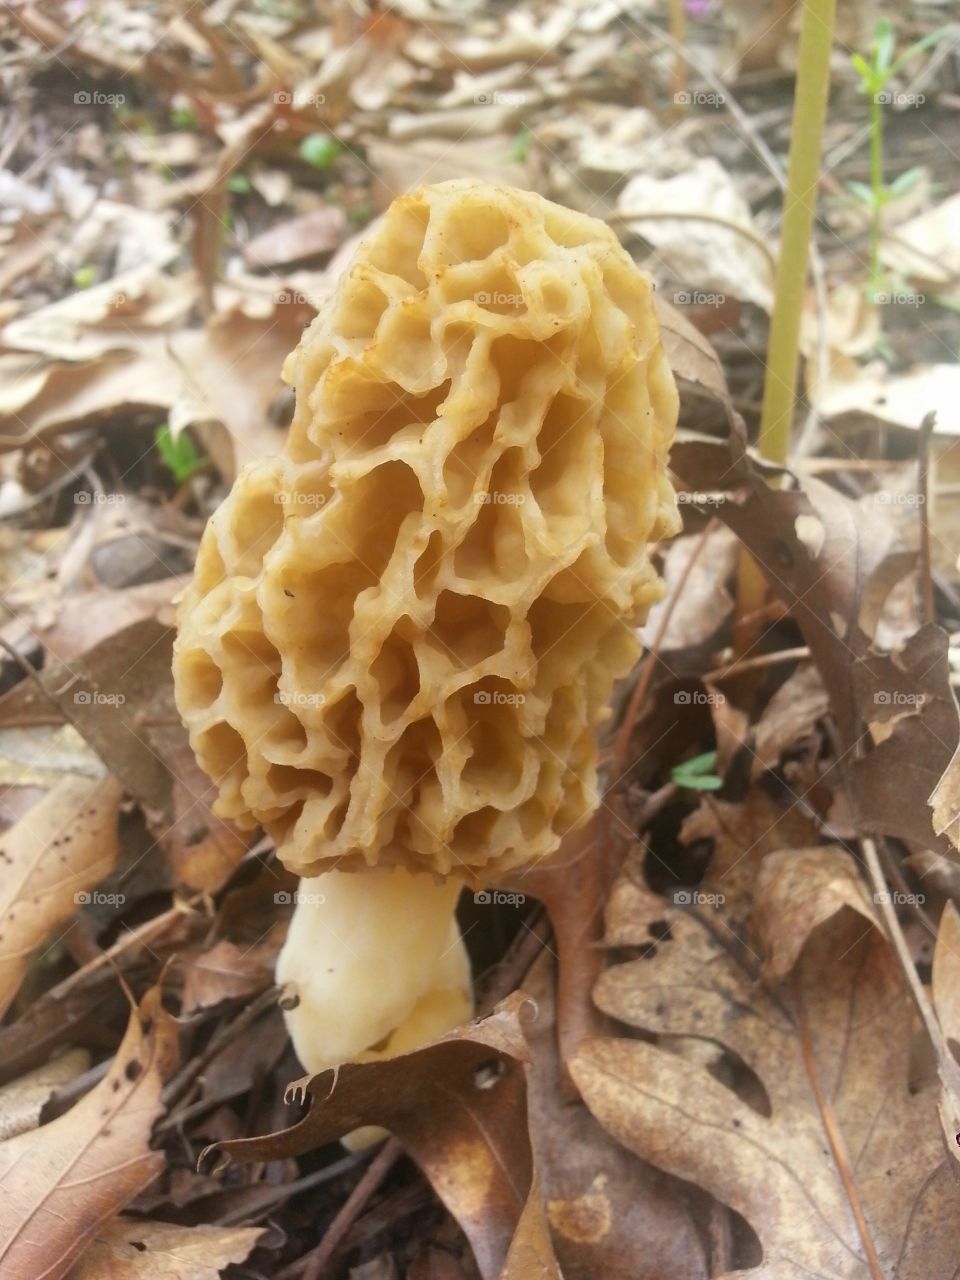 I love hunting white morels, the holy grail of wild mushrooms. This is, unfortunately, the only picture I took of one of dozens we found.